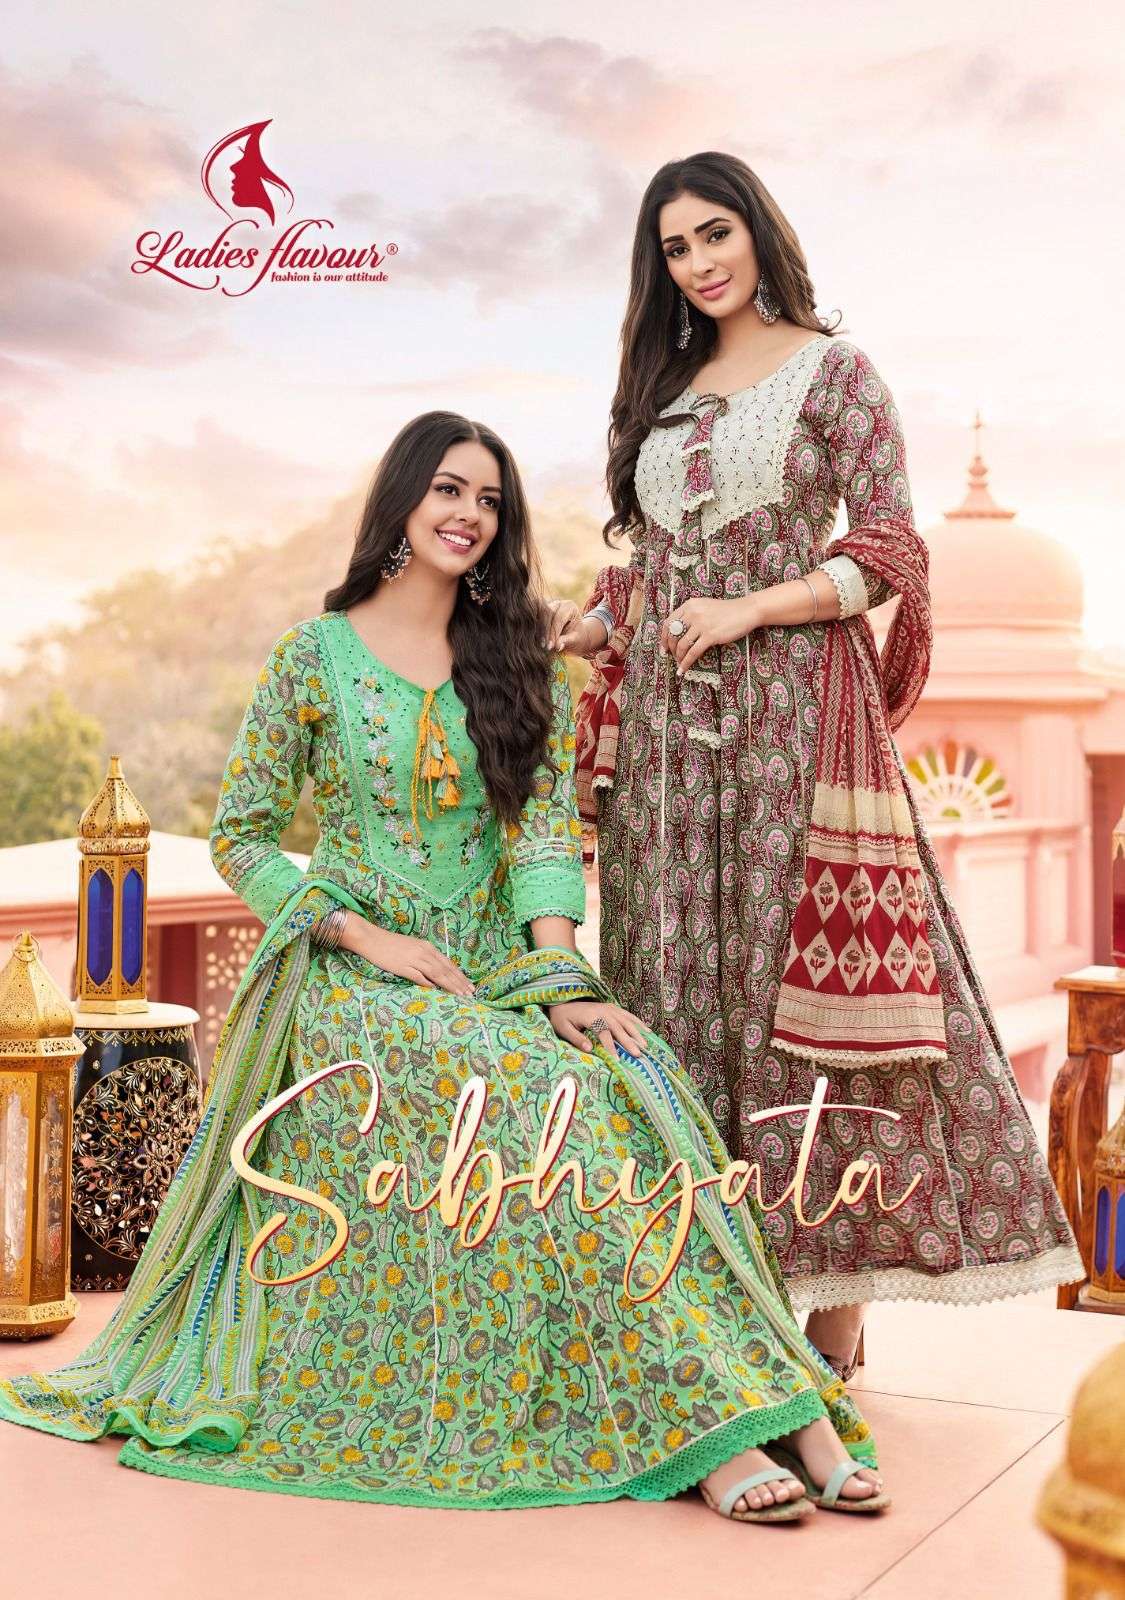 LADIES FLAVOUR PRESENTS SABHYATA FANCY ANARKALI GOWN STYLE KURTIS WITH DUPPATA CATALOG WHOLESALER AND EXPORTER IN SURAT 